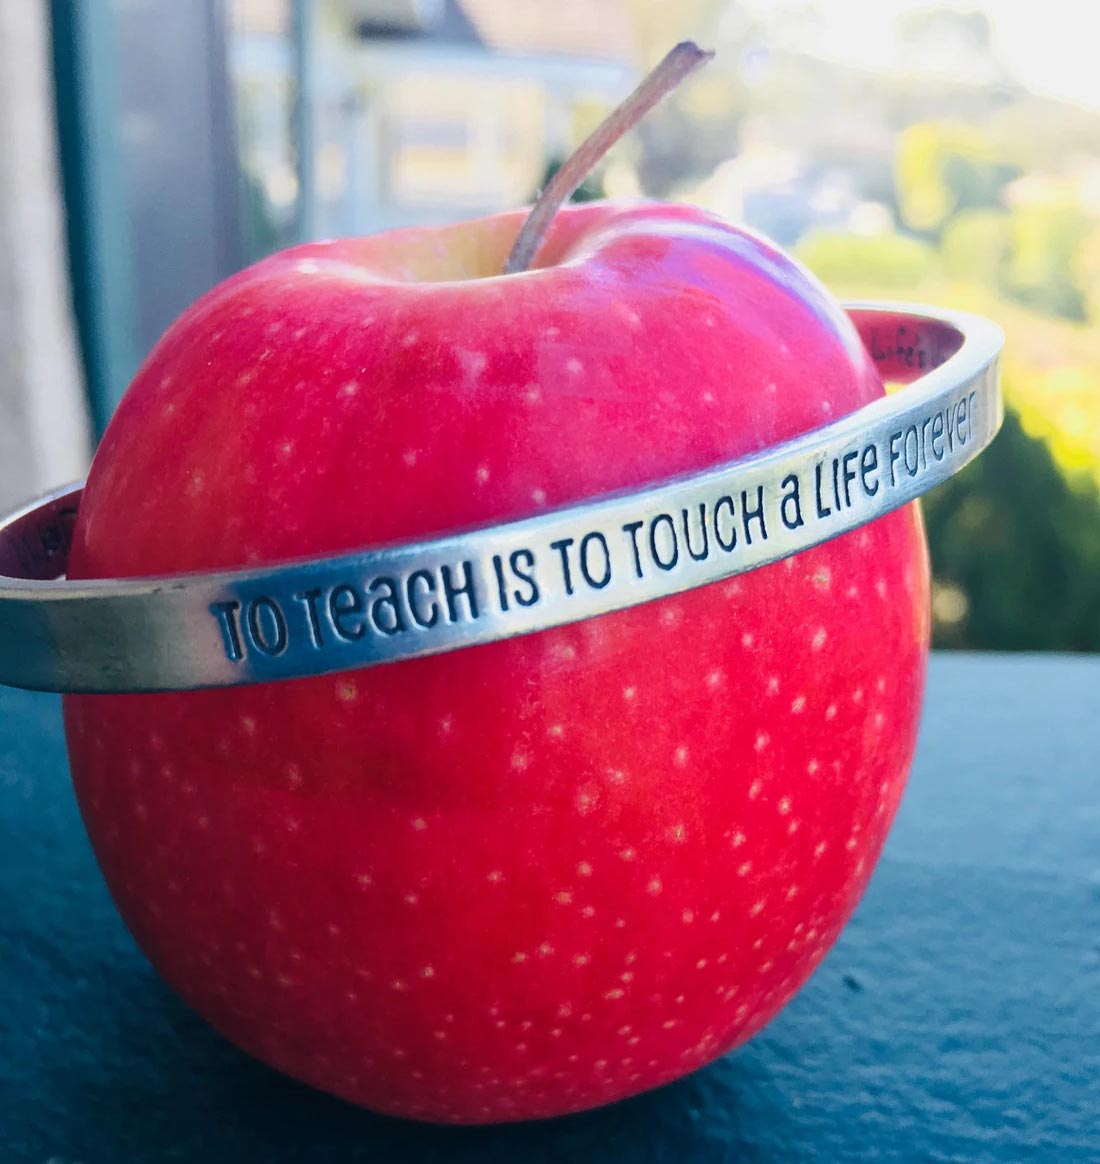 To Teach is to Touch a Life Forever Quotable Cuff Bracelet around an apple